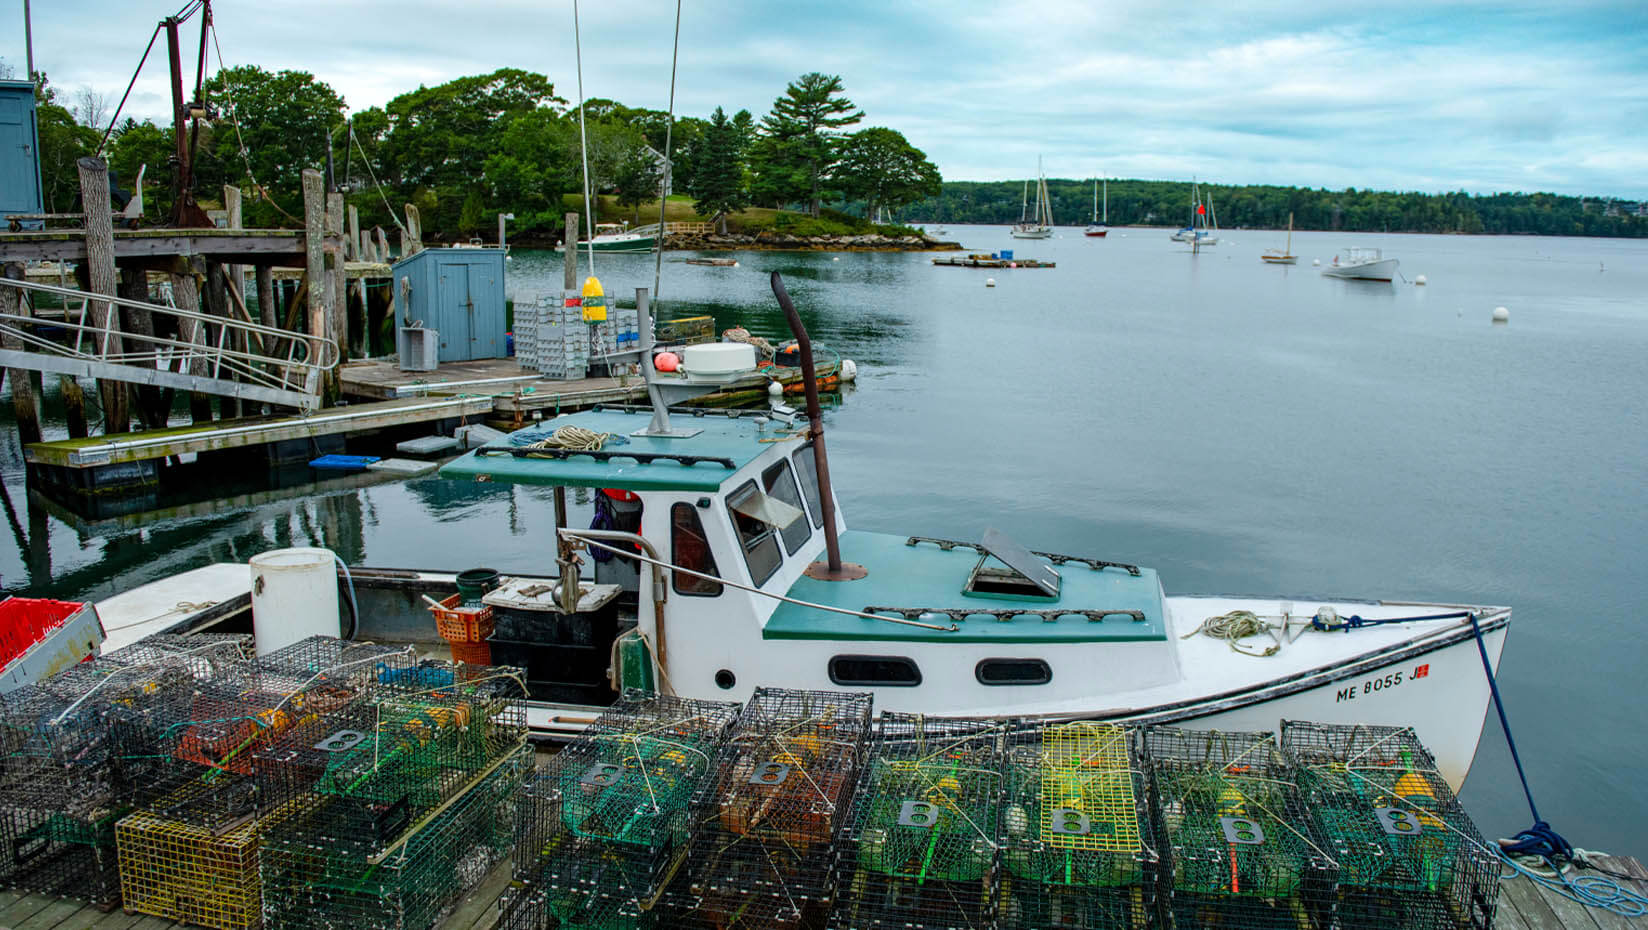 A photo of a lobster boat at a pier